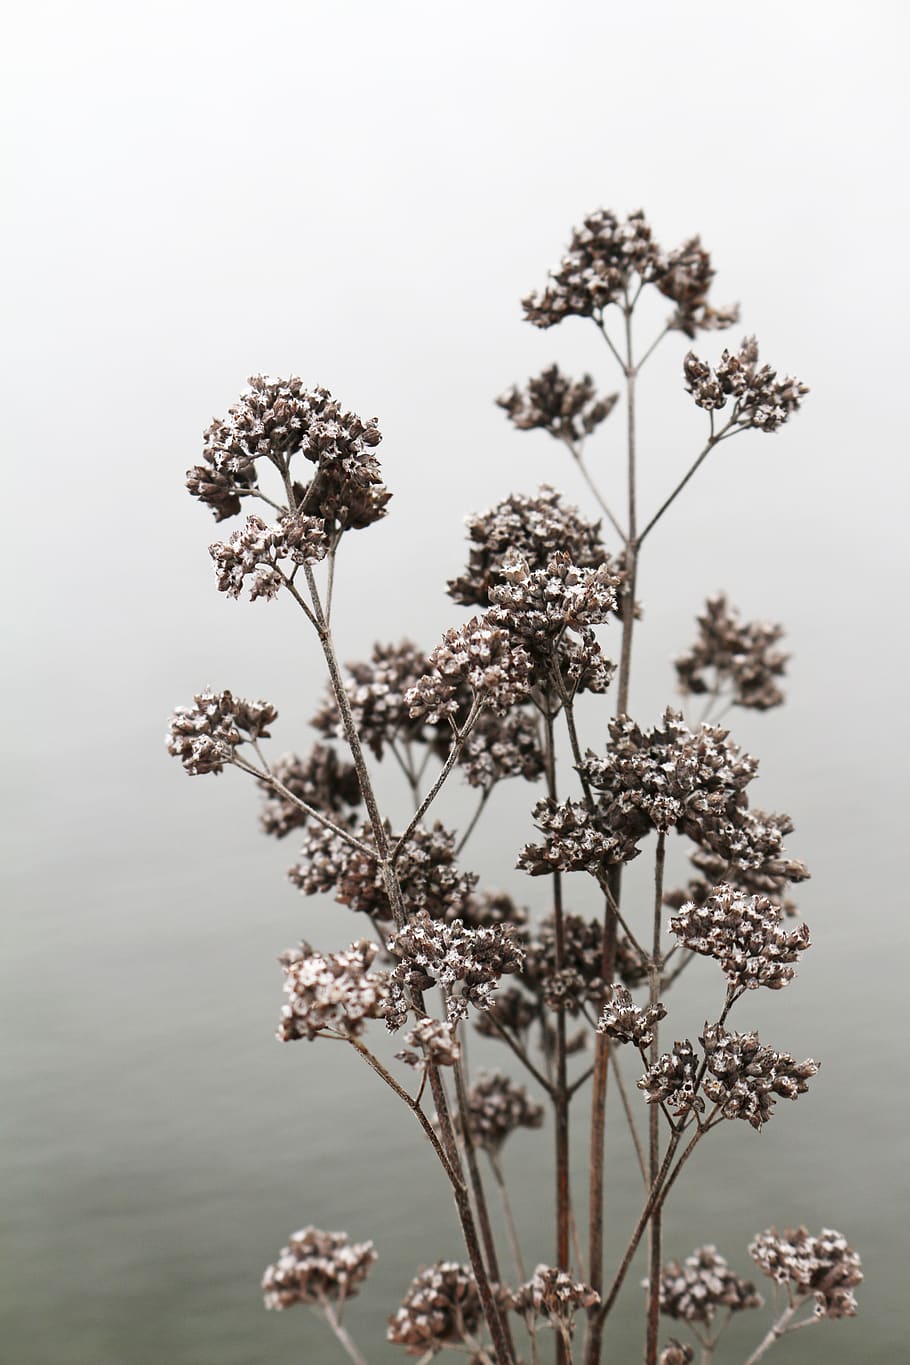 wilted, flowers, bouquet, fade, wilting, plant, dry, withered, nature, mood